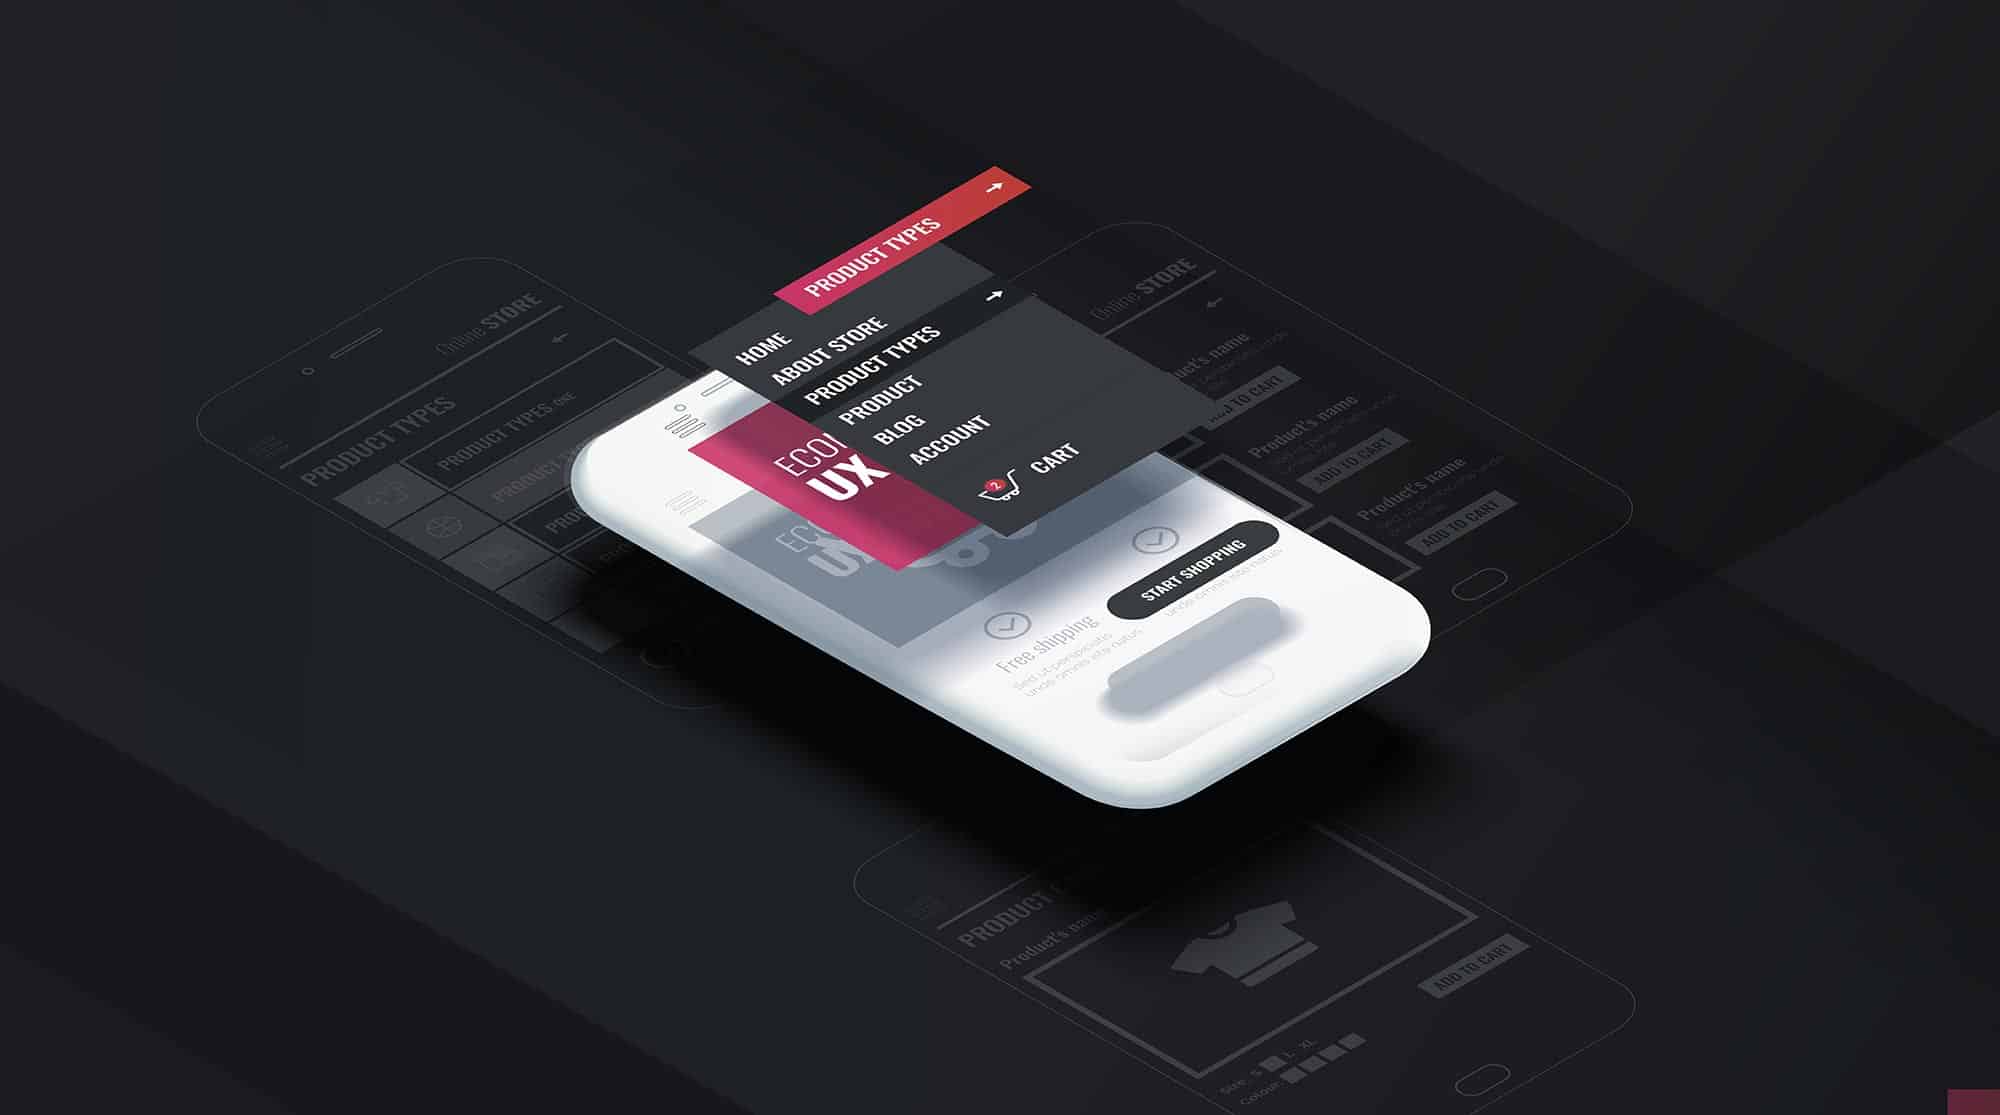 How UX UI Design Will Help Your Business Succeed